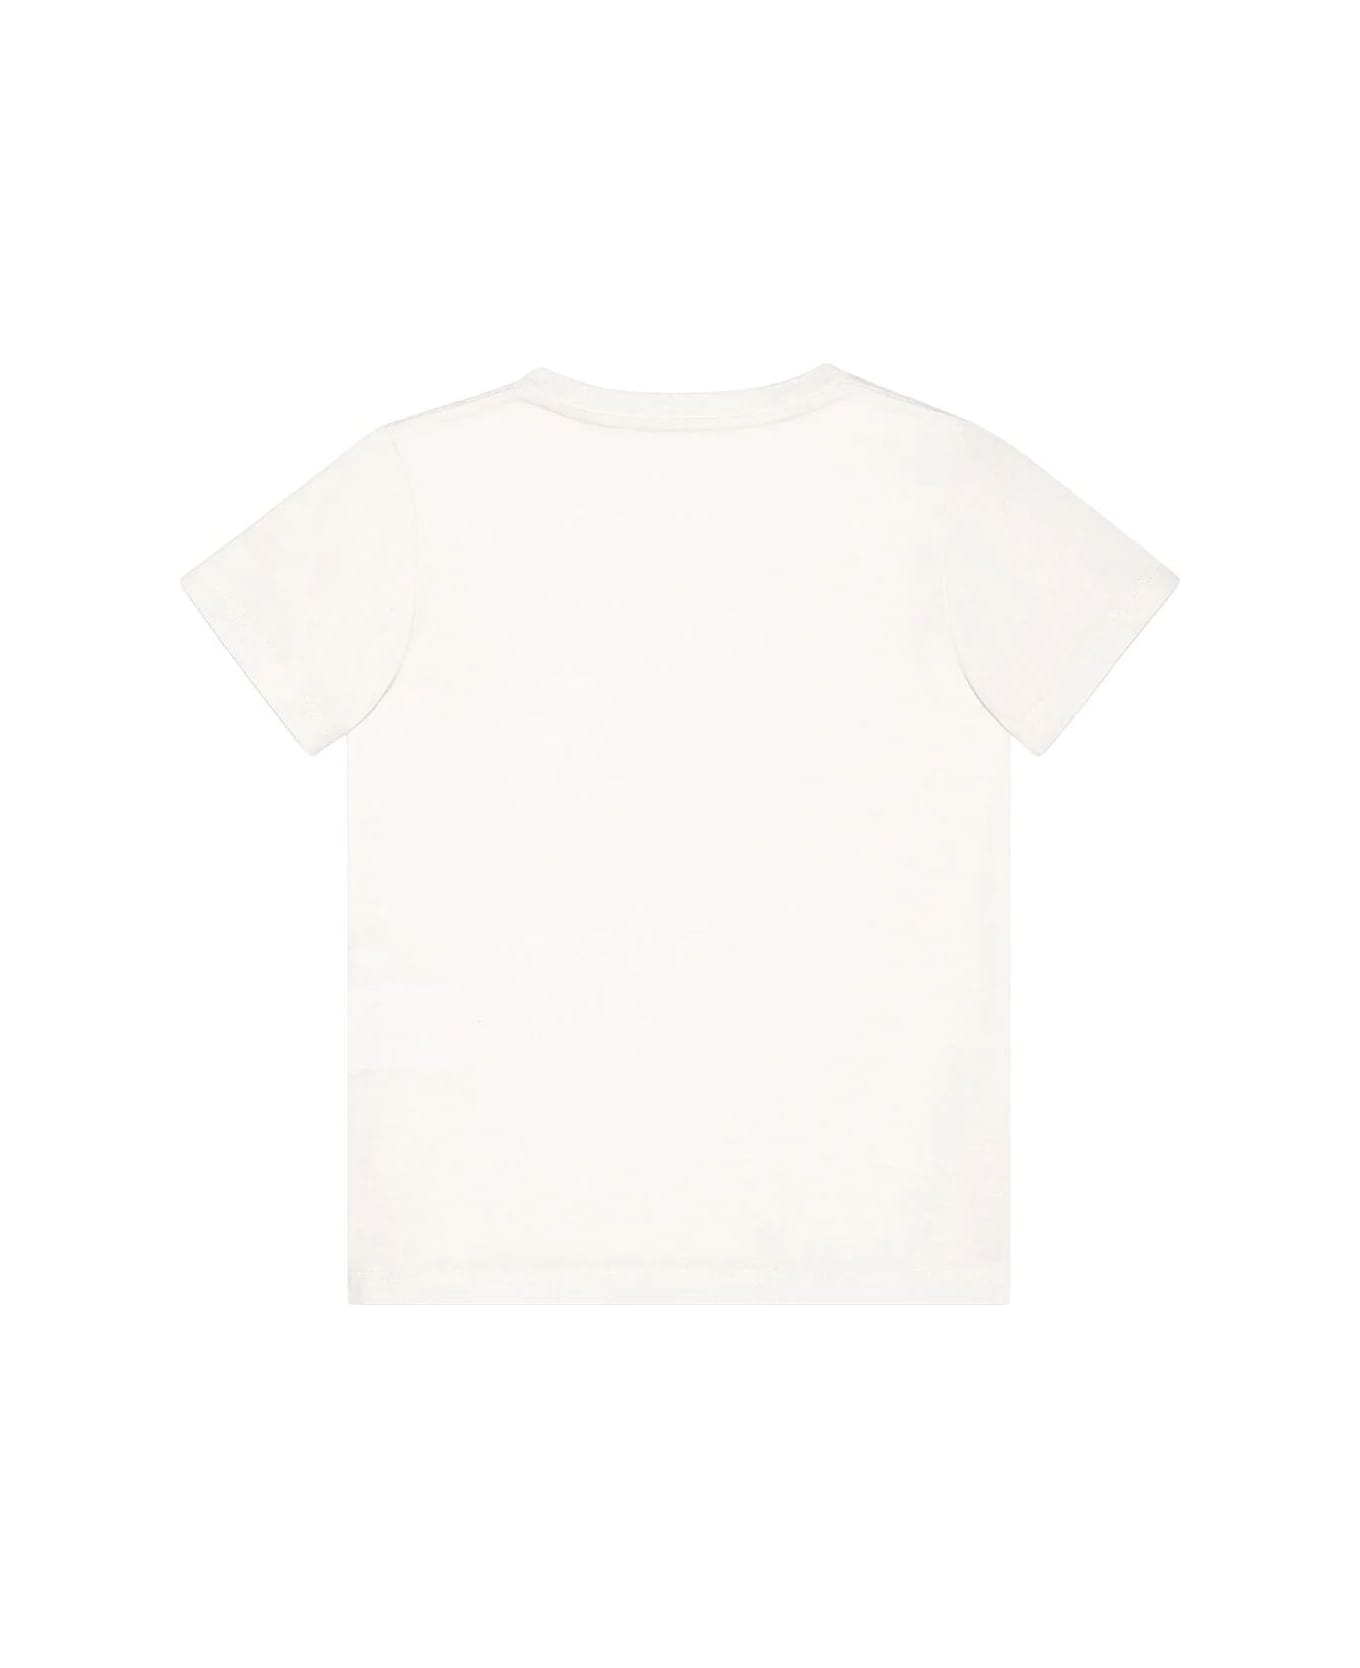 Gucci T-shirt Cotton Jersey - White Green Red Tシャツ＆ポロシャツ